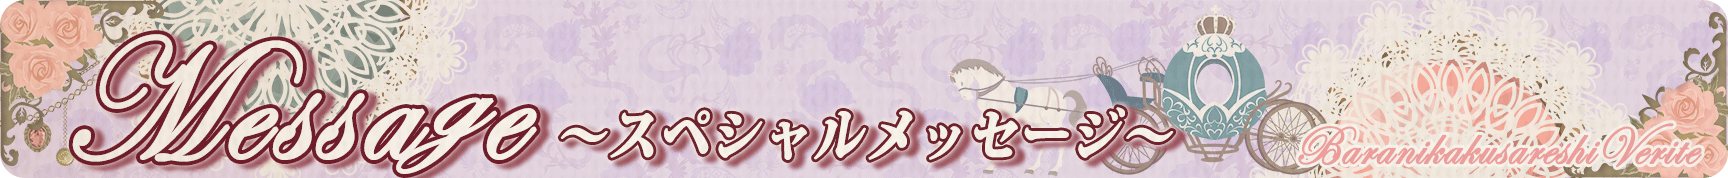 banner03.png